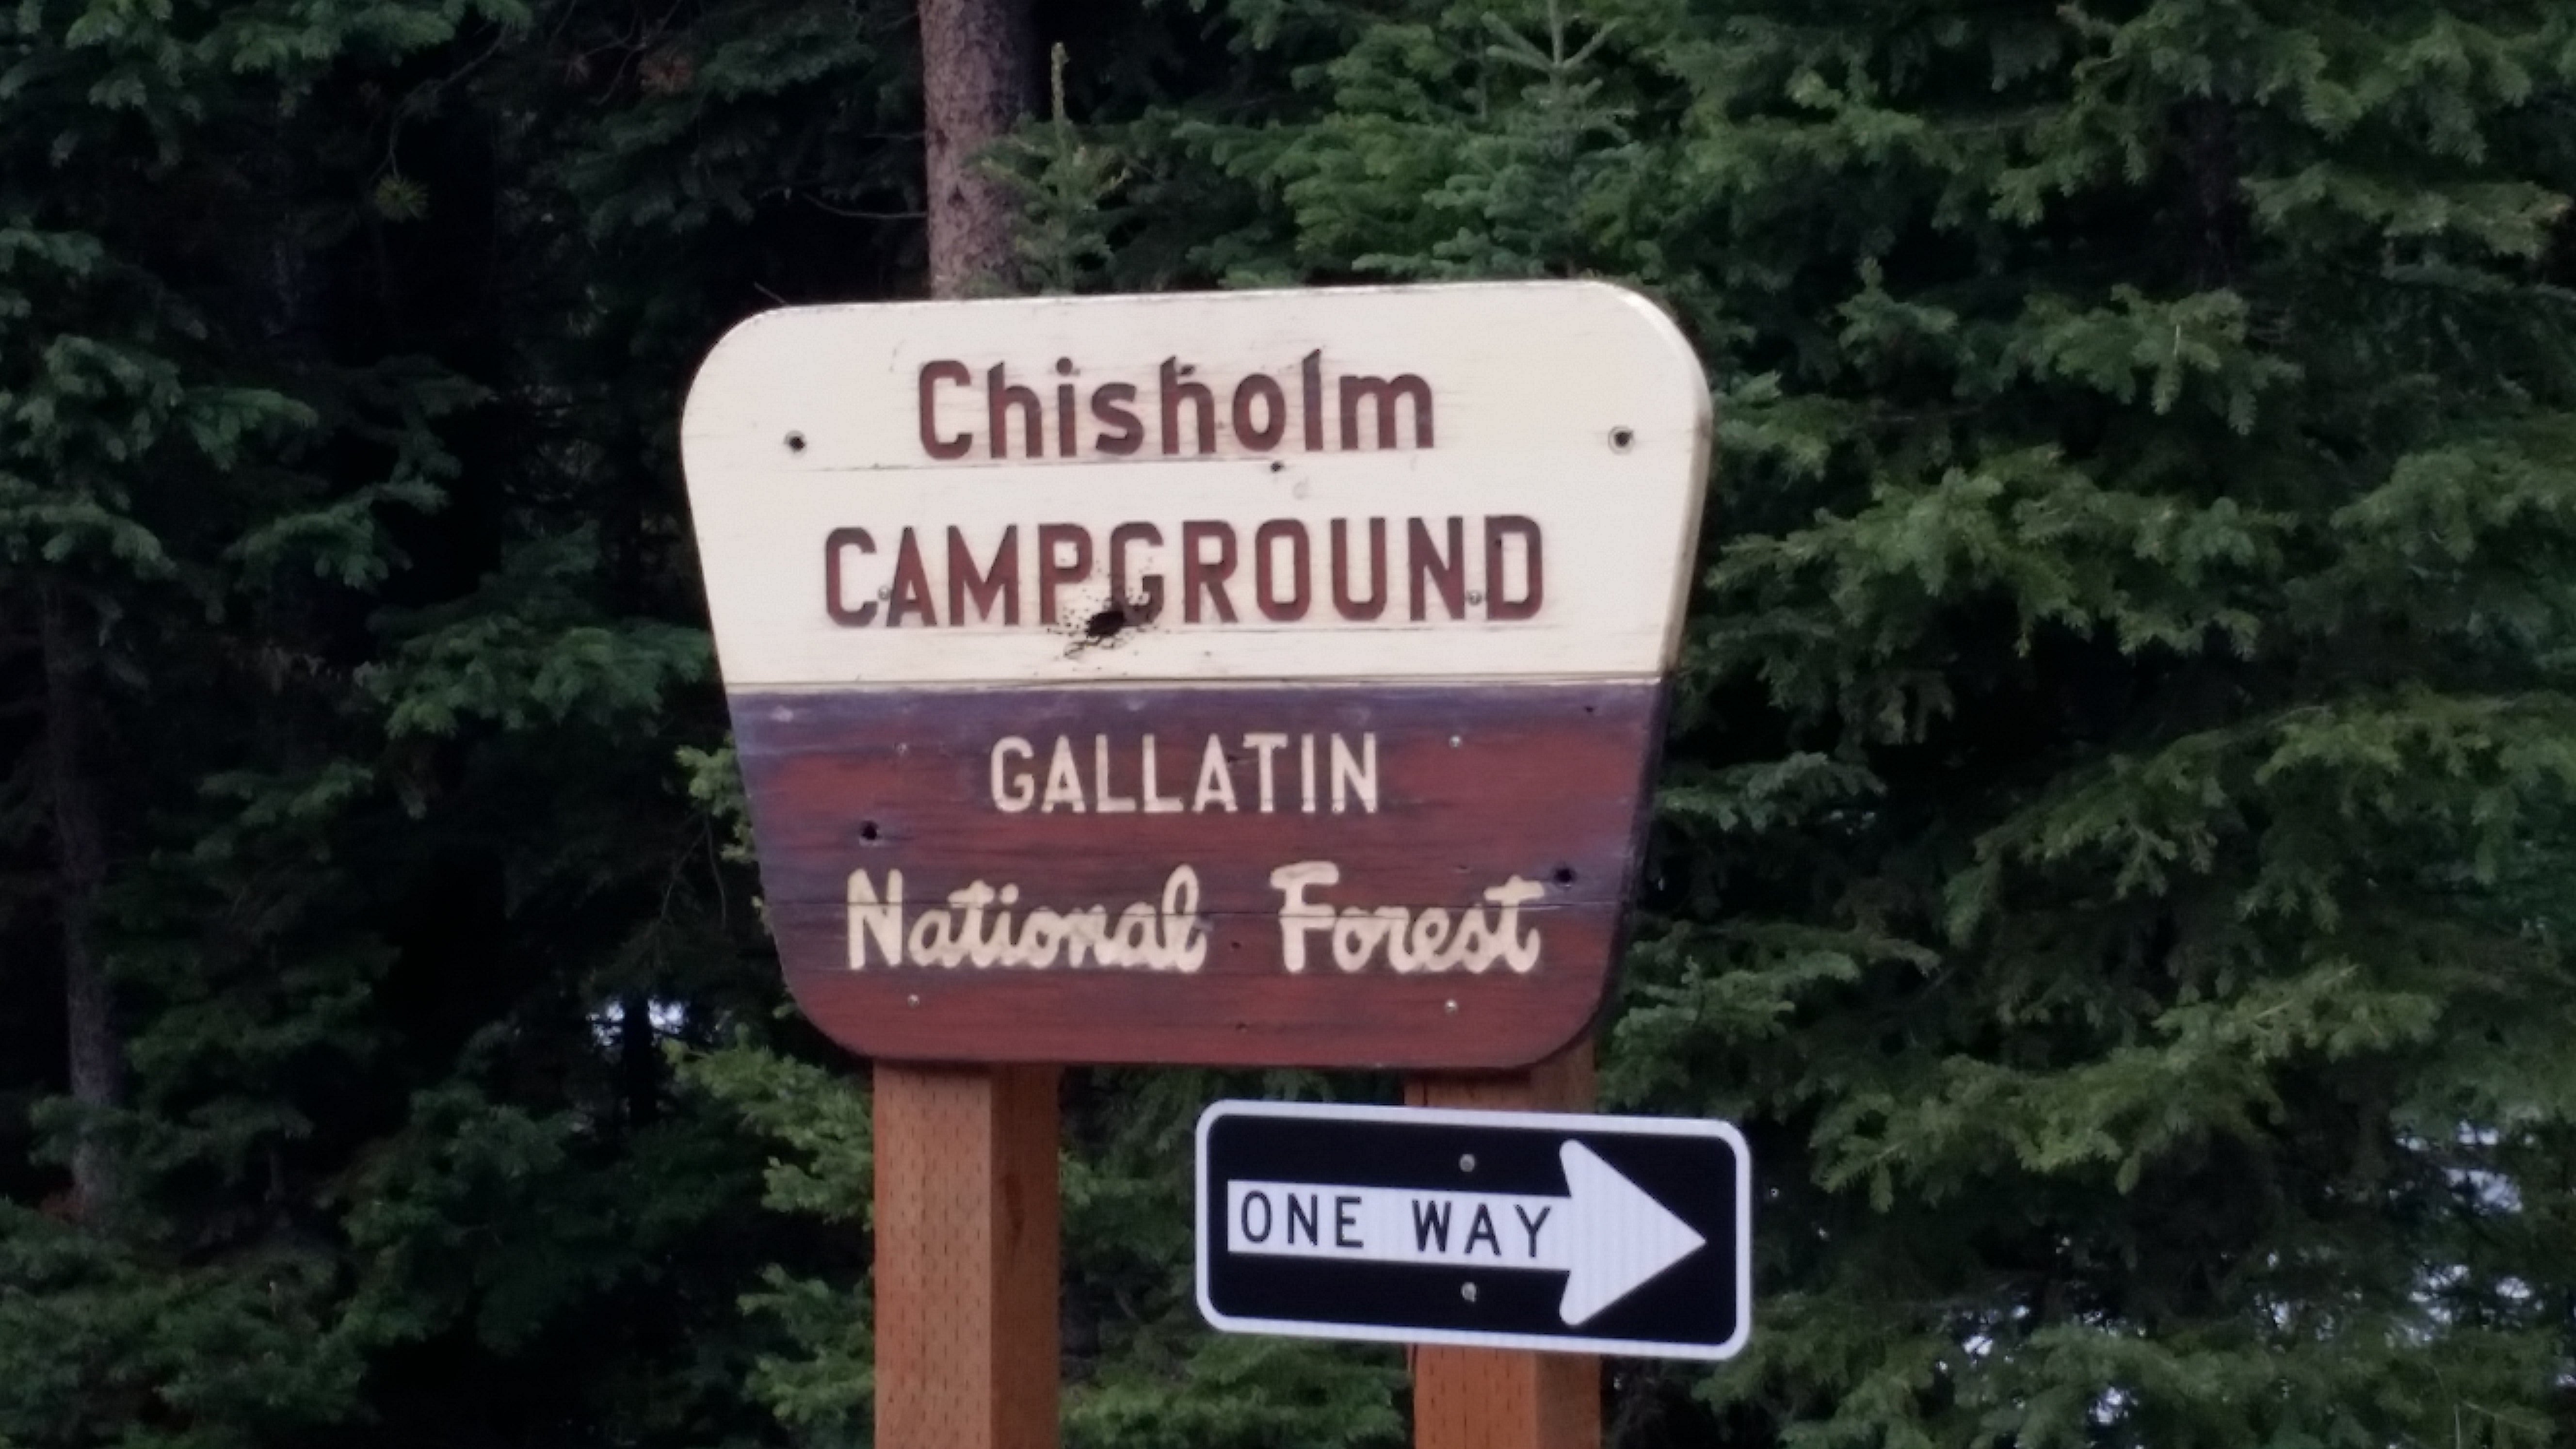 Camper submitted image from Chisholm Campground - 5